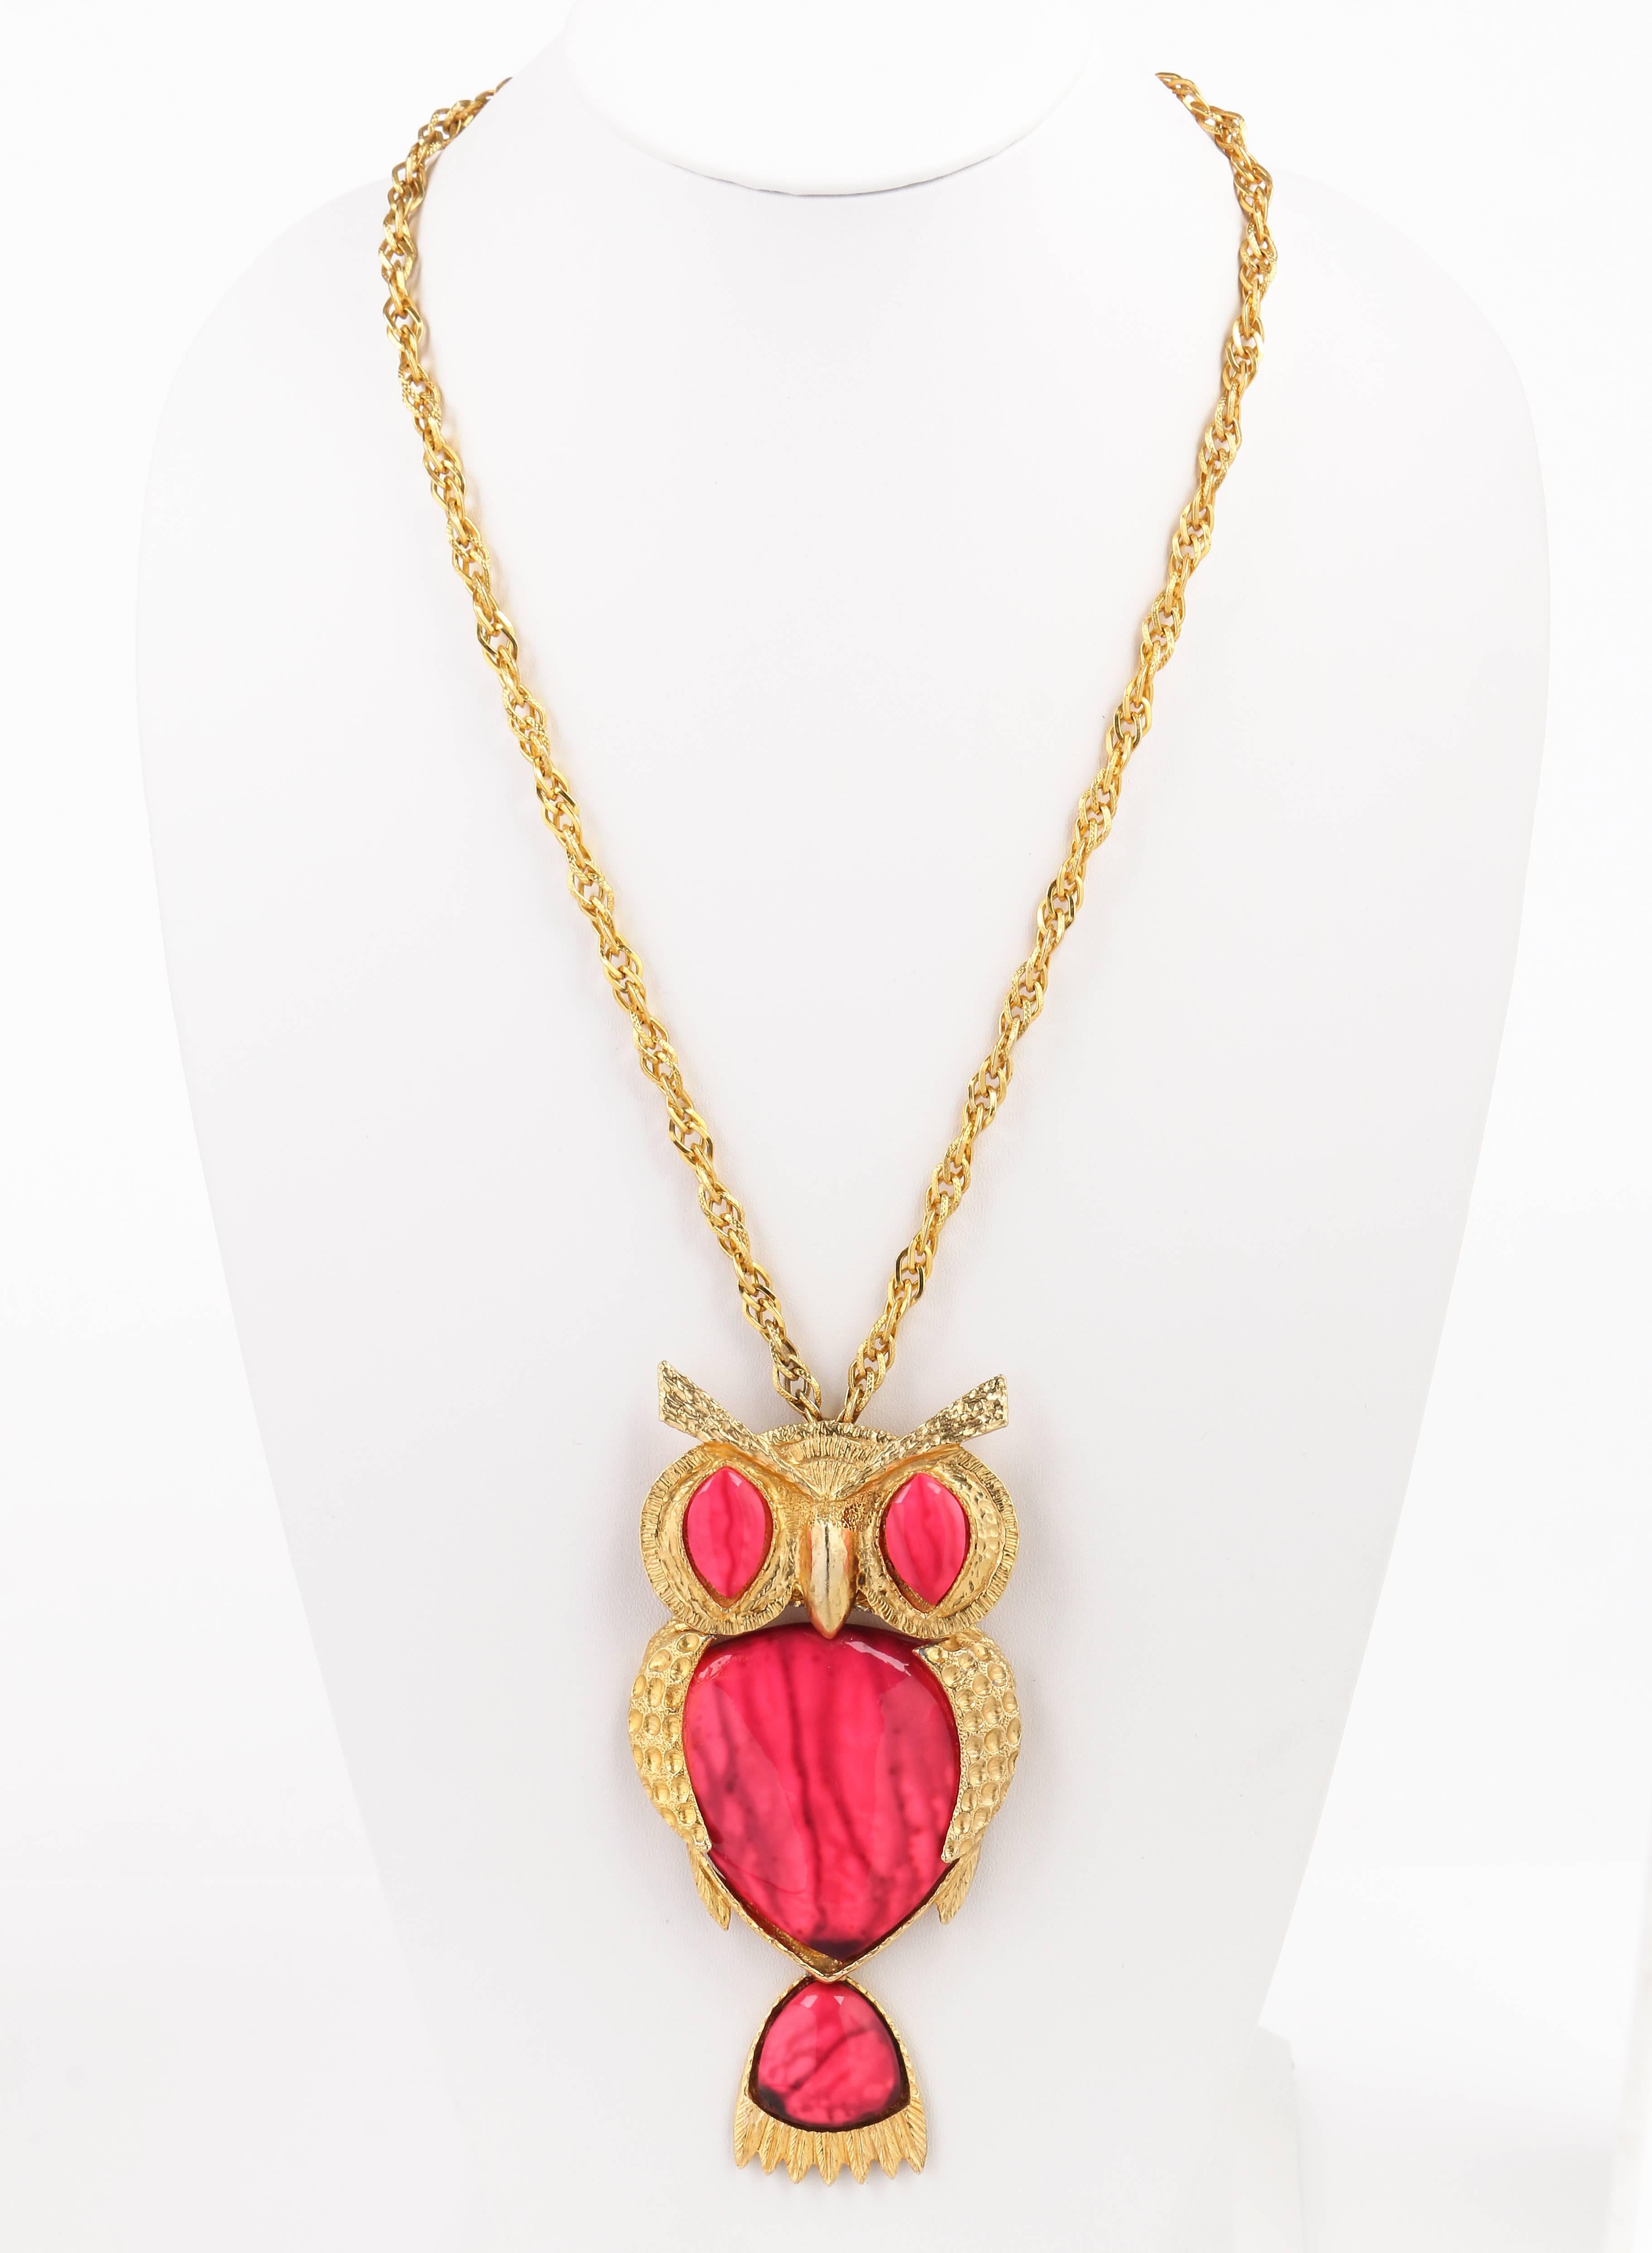 Vintage JULIANA Delizza & Elster c.1970's book piece large gold tone statement owl pendant necklace with marbled pink heat formed cabochon plastic detailing. Large gold tone metal owl has three-dimensional articulated pieces. Metal is hammered with